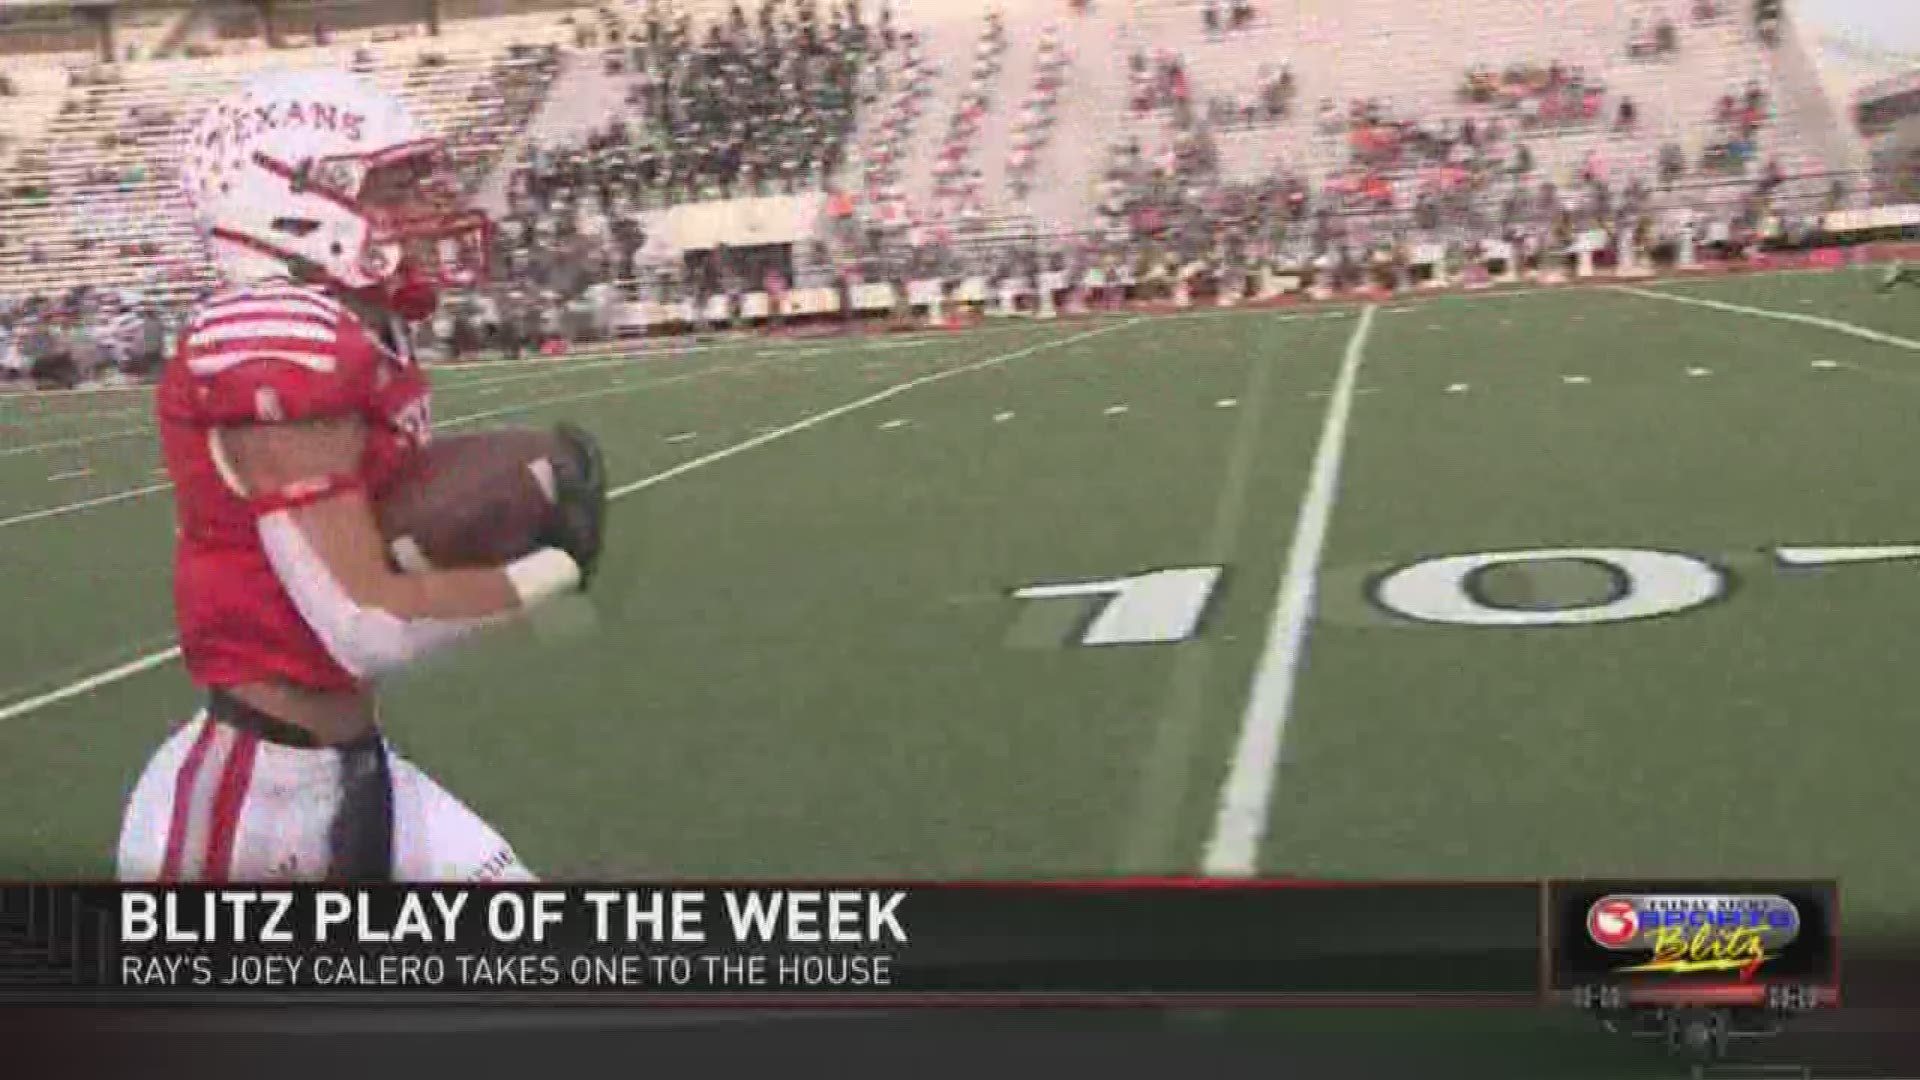 Part IV includes: Ray's Joey Calero touchdown run for our Play of the Week! Plus, a look at Saturday's college football games and a look at next week's Blitz.